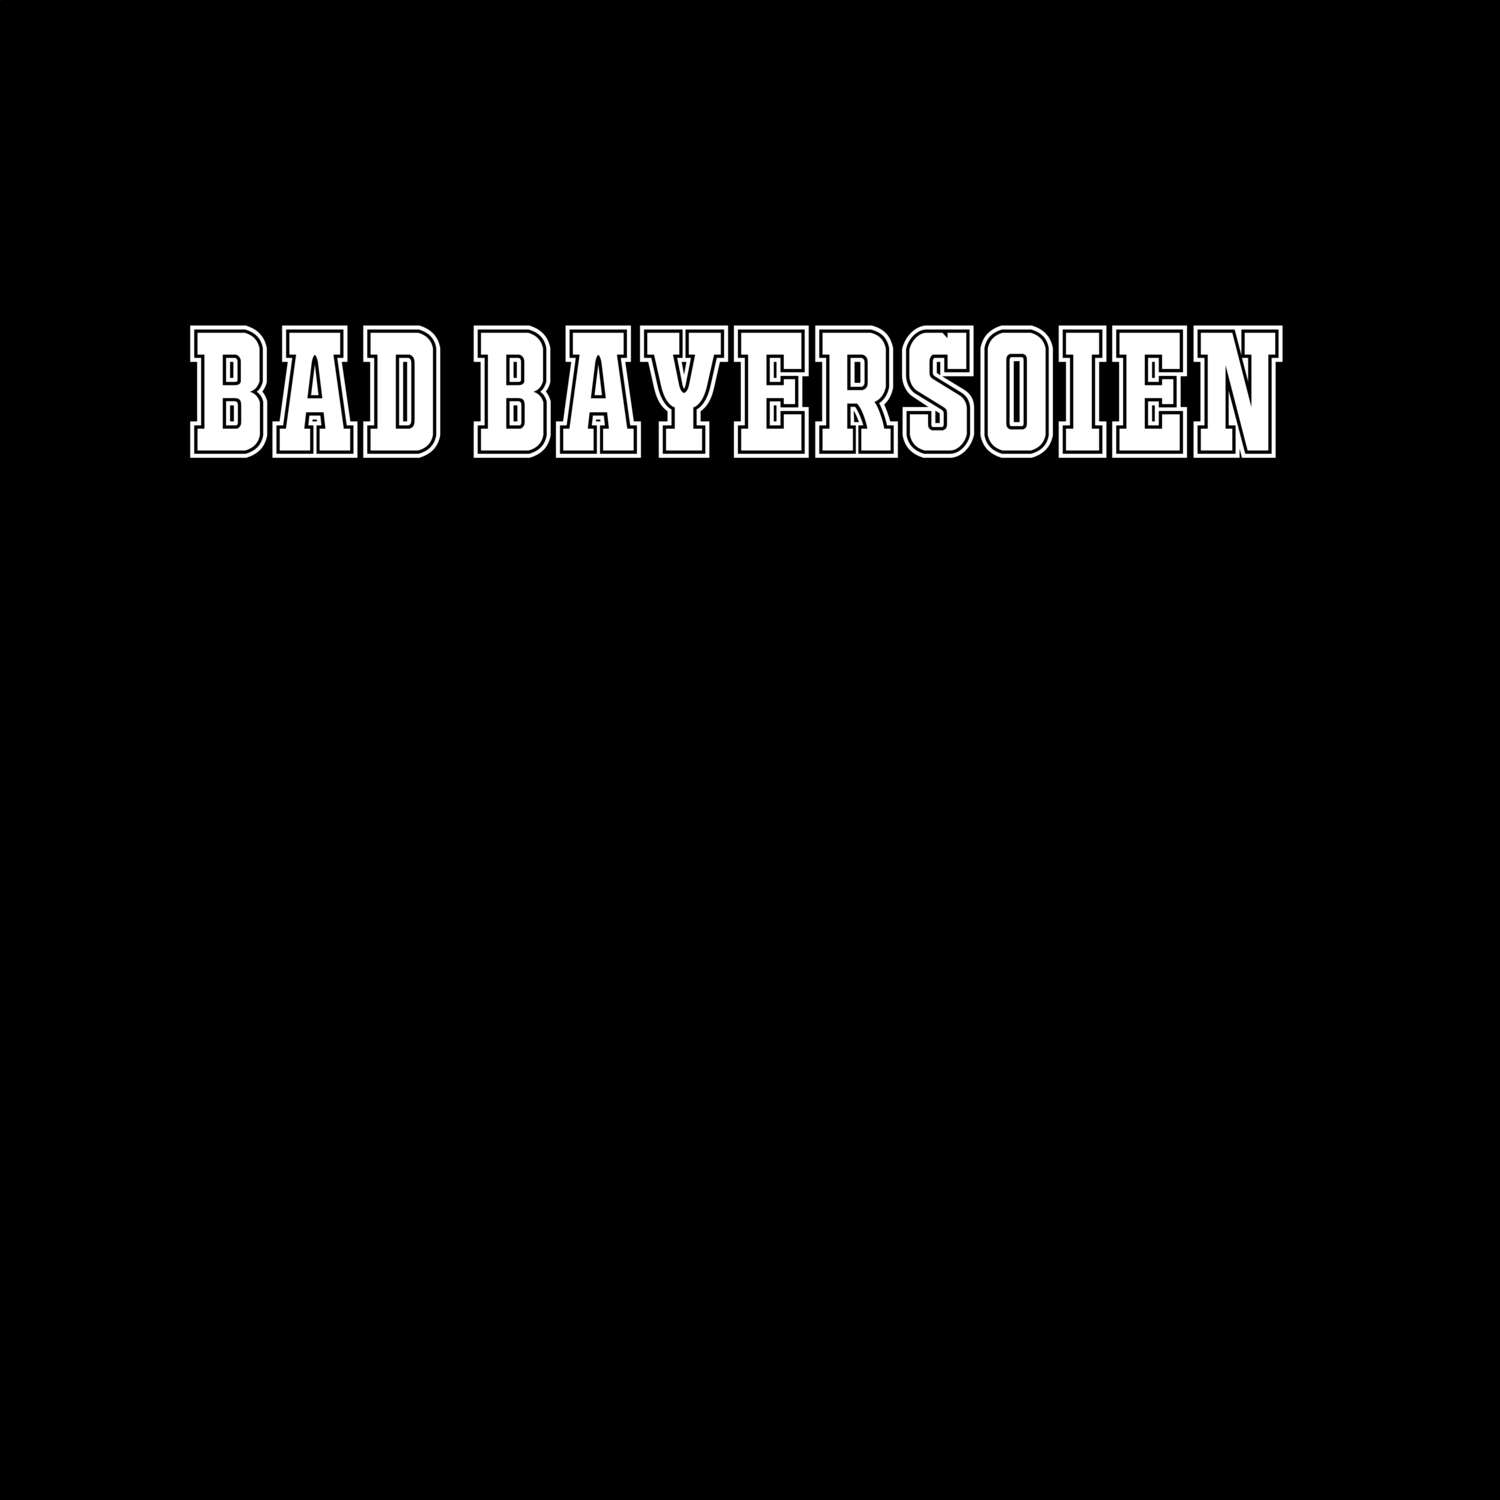 Bad Bayersoien T-Shirt »Classic«